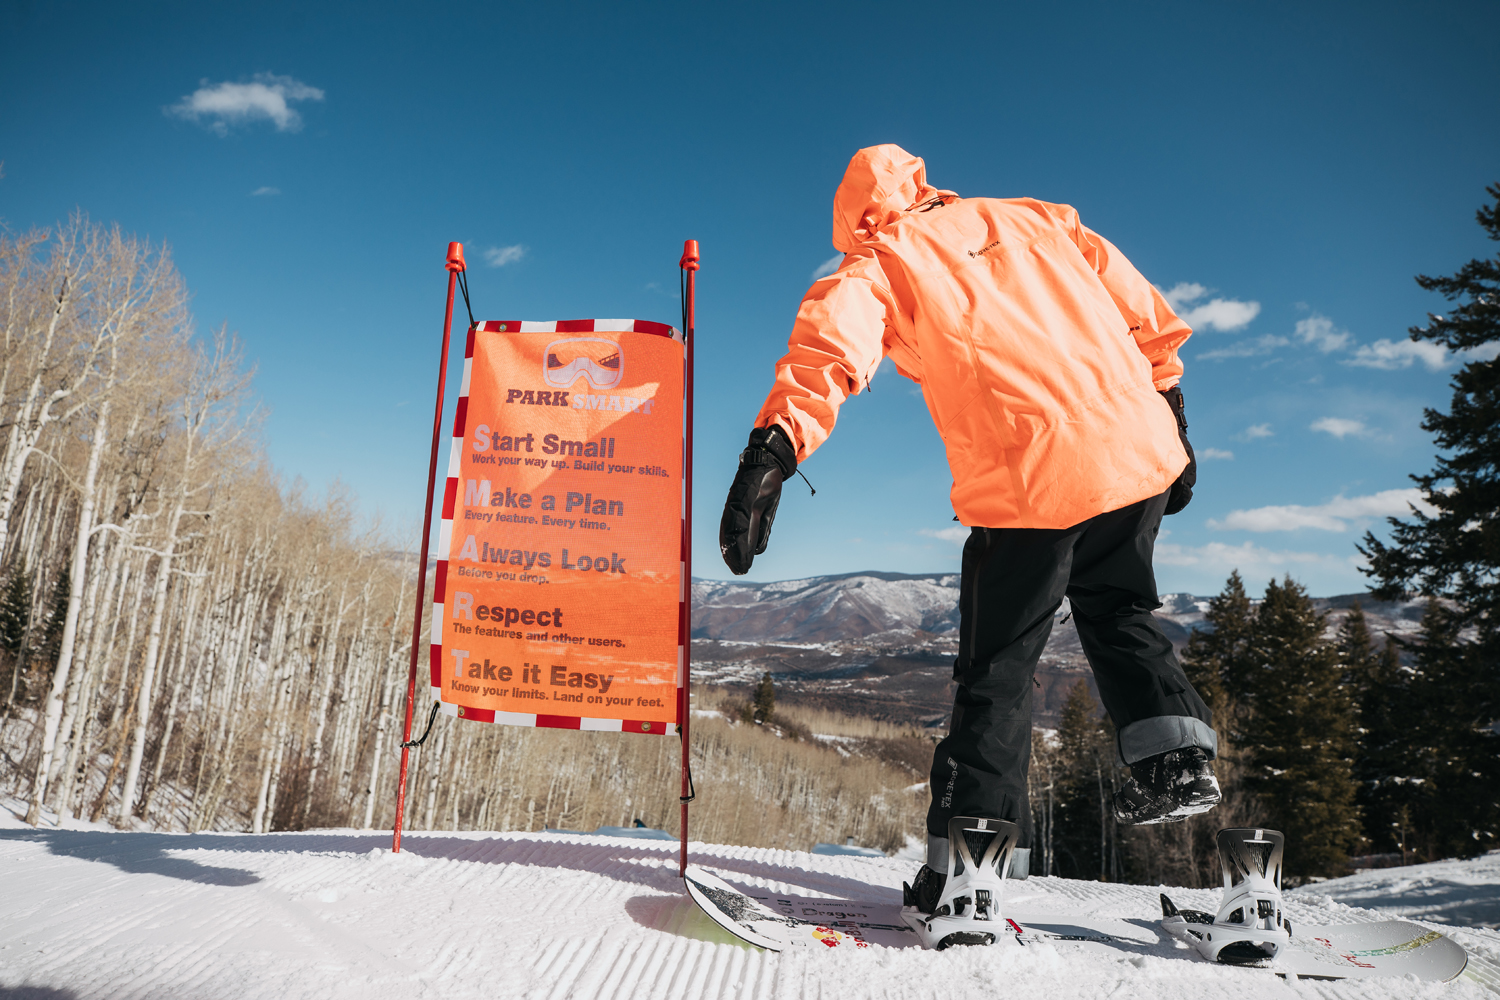 Pro snowboarder Brock Crouch riding Burton Step On strapless bindings. Here he's pictured in an orange winter jacket on the top of a snowy mountain in Aspen, Colorado next to an orange sign.